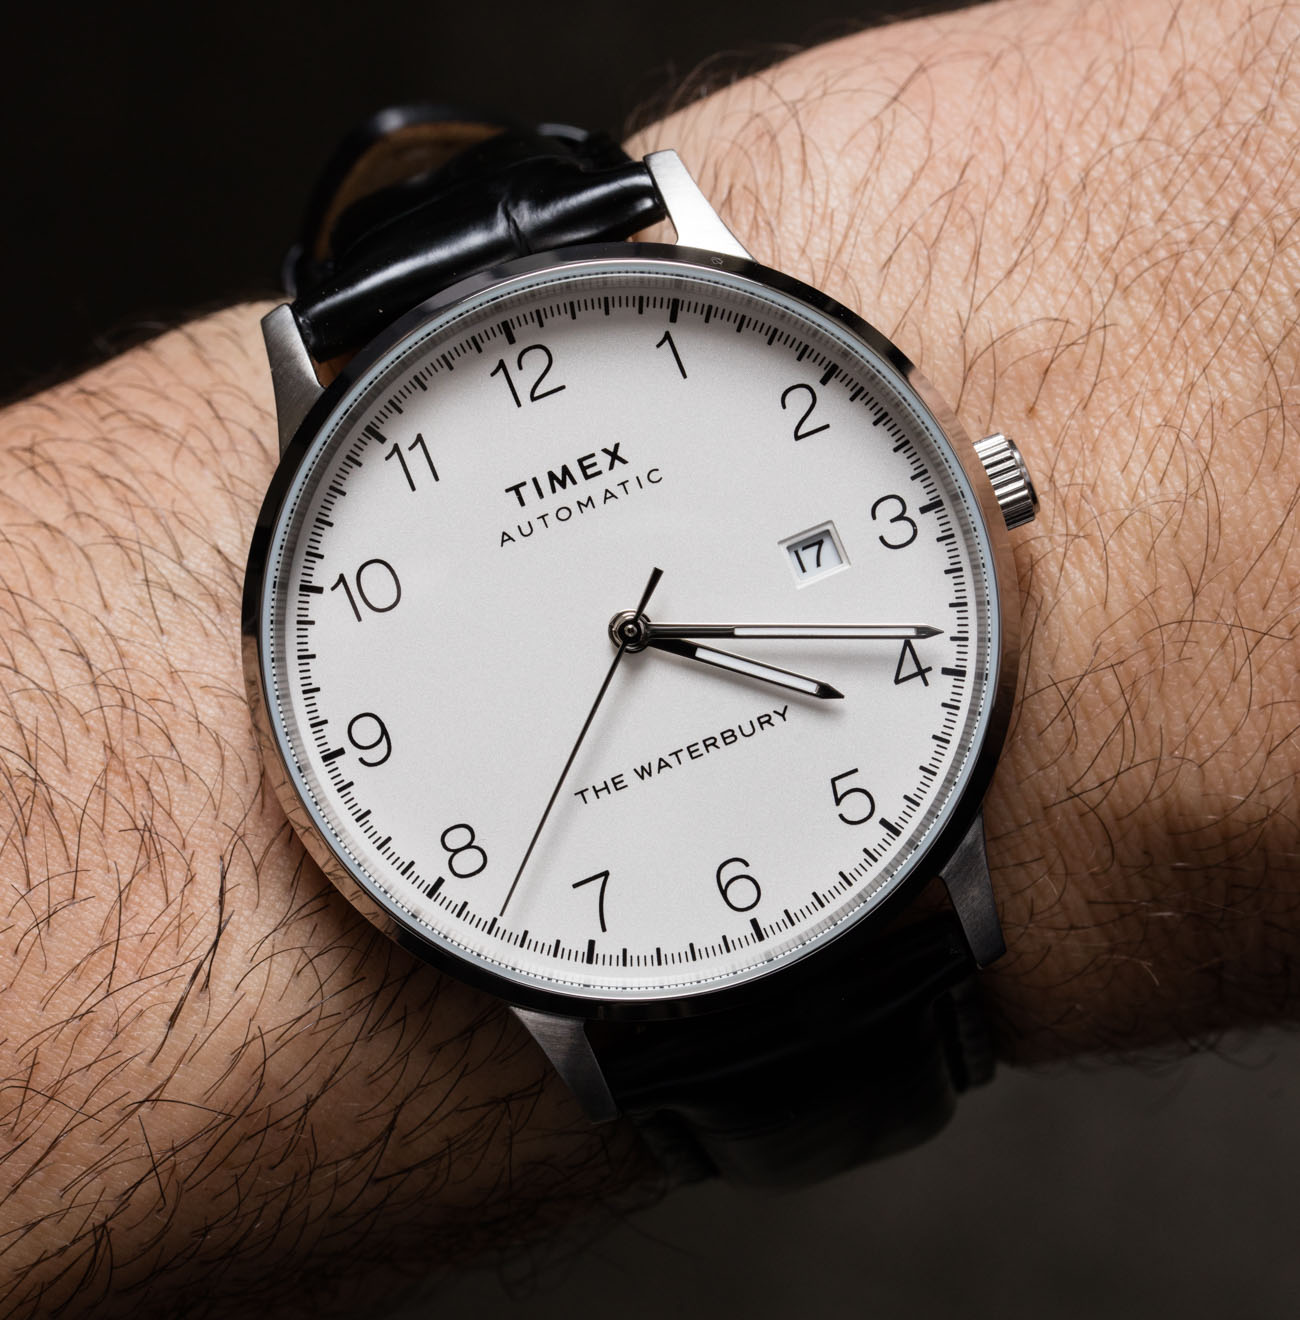 Timex Waterbury Classic Automatic Watch Hands-On